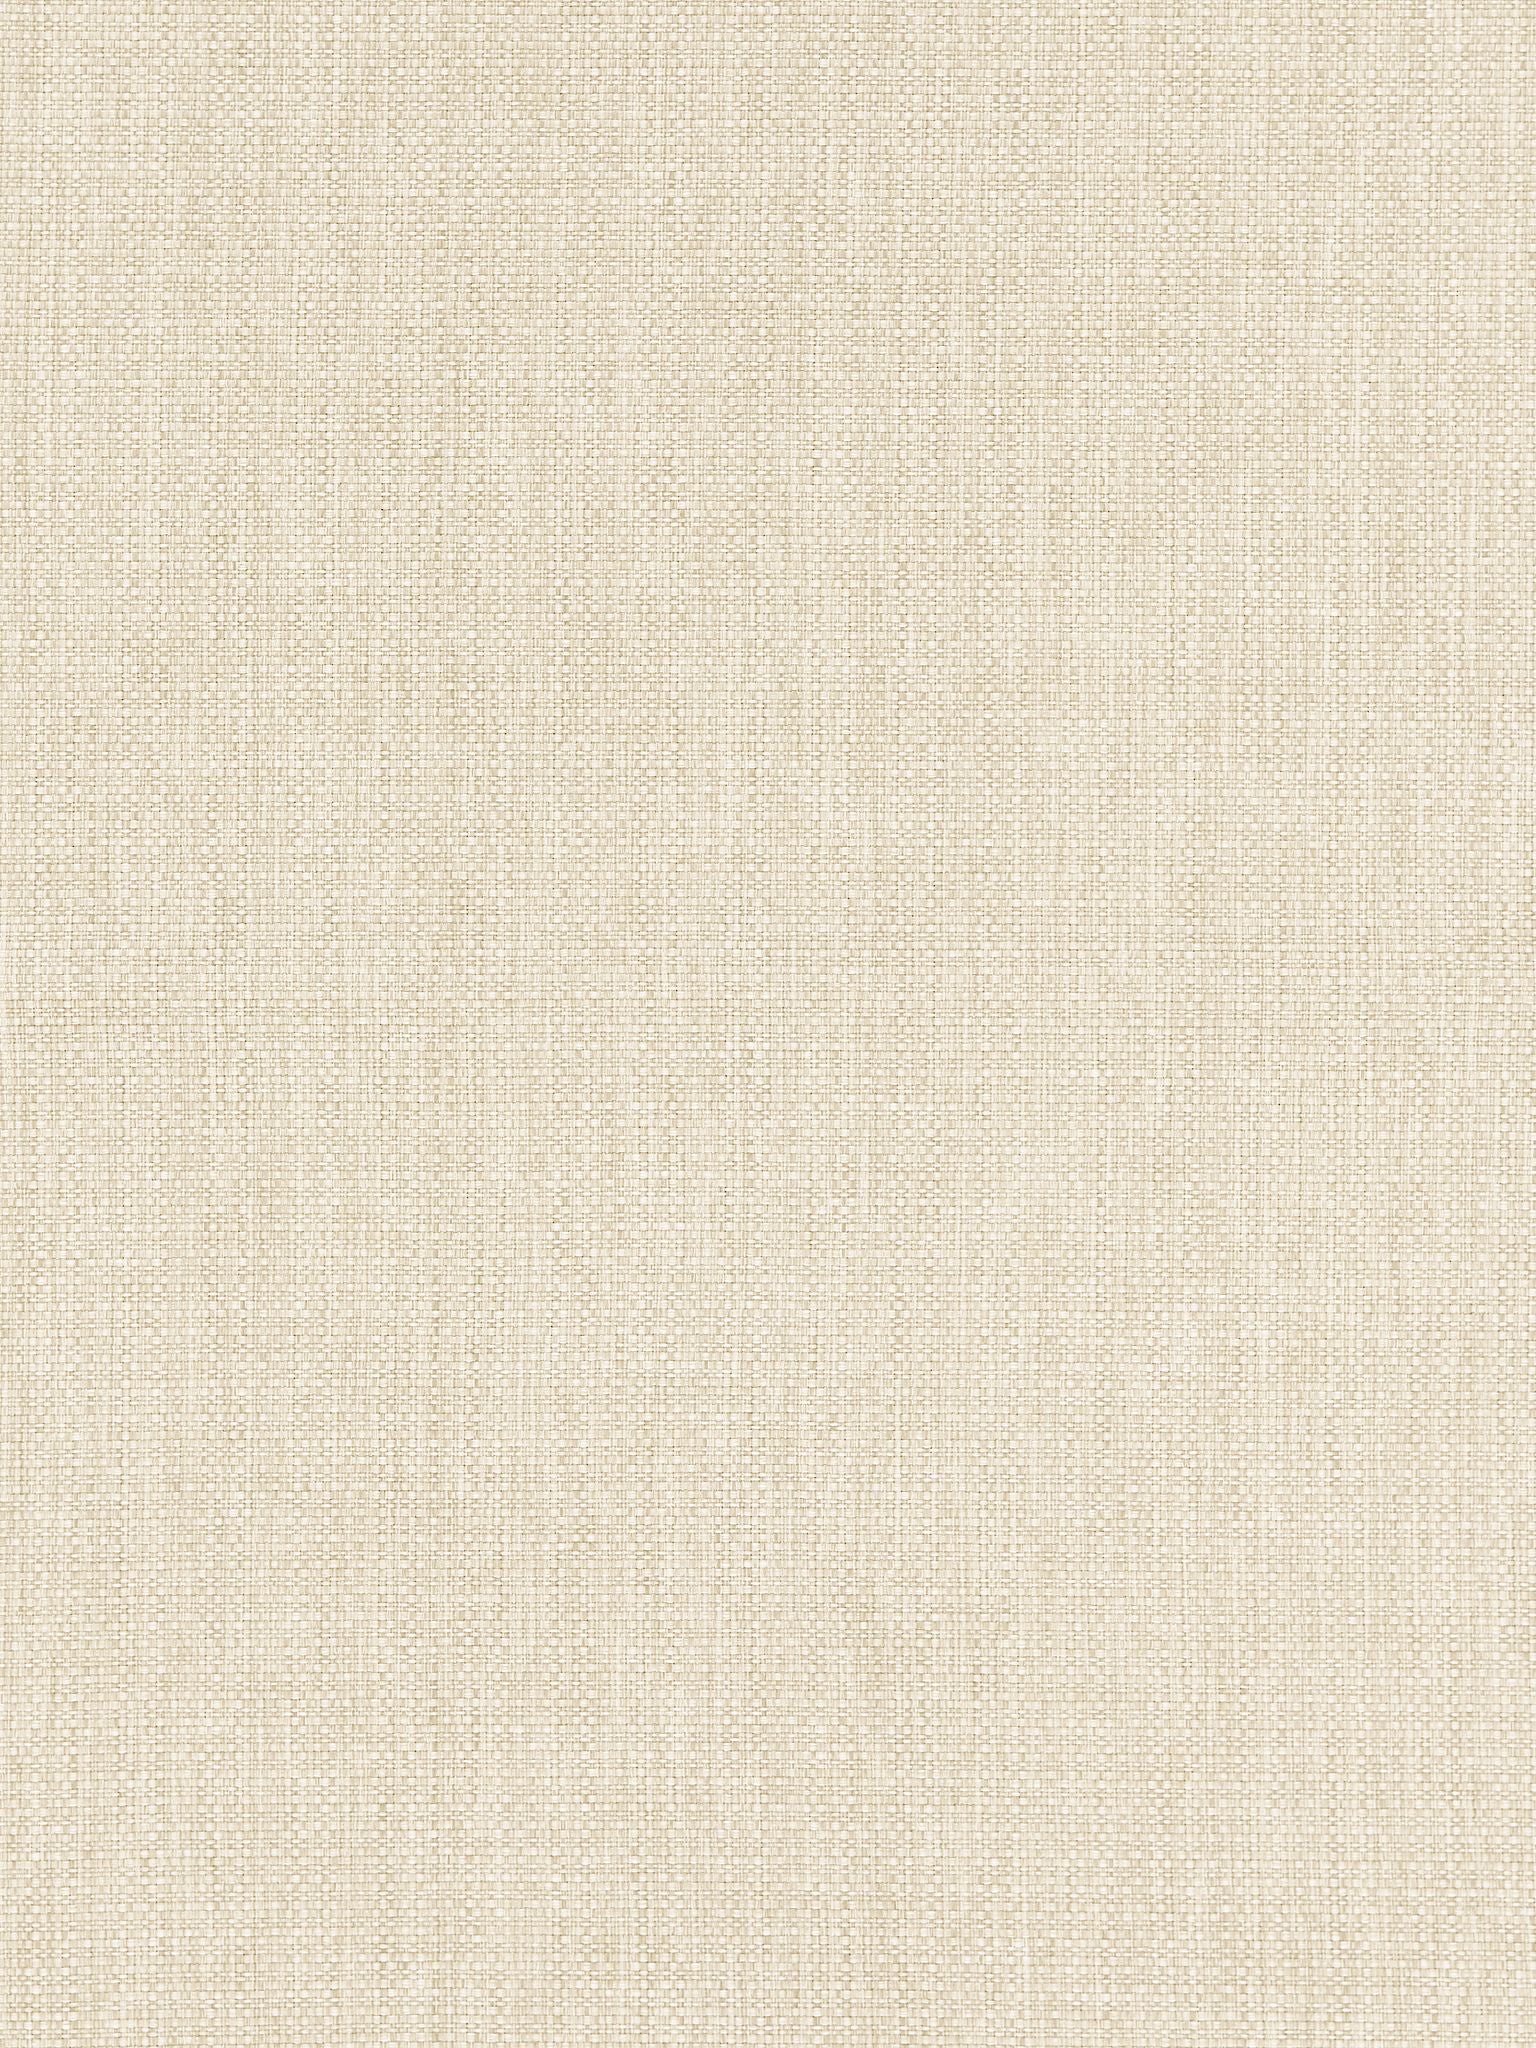 Tahiti Tweed fabric in linen color - pattern number SC 000127192 - by Scalamandre in the Scalamandre Fabrics Book 1 collection